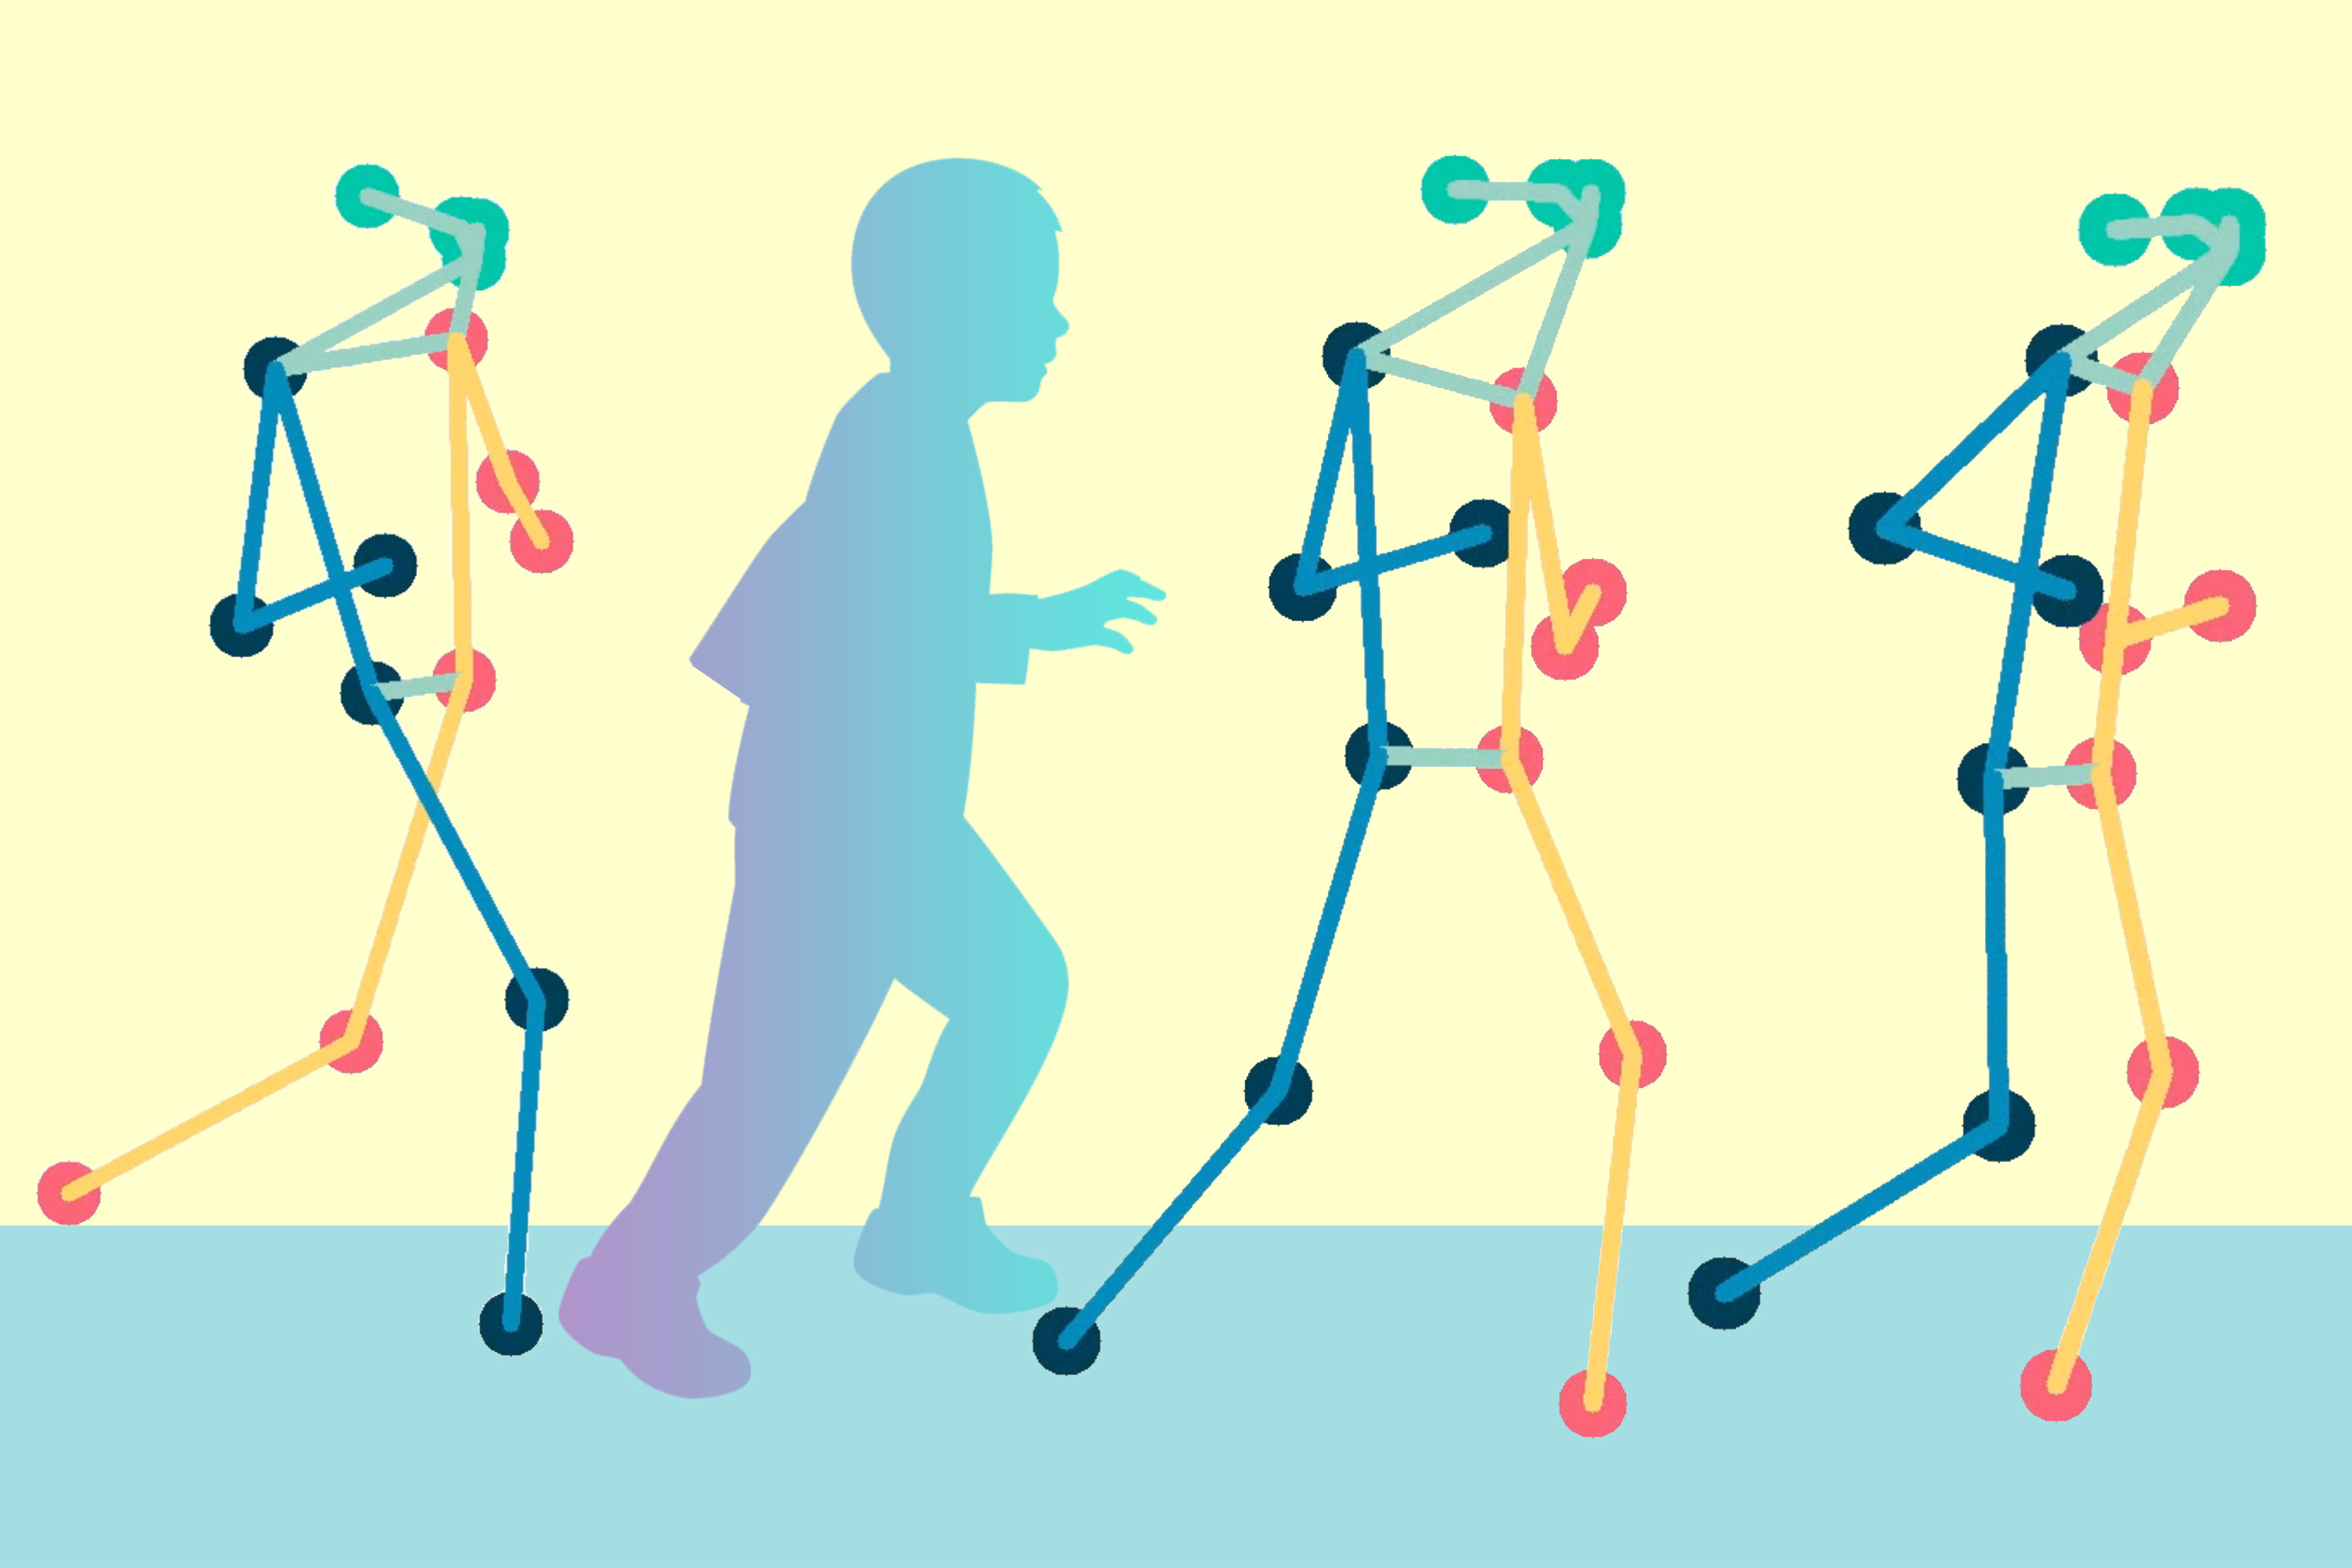 A pose-mapping technique could remotely evaluate patients with cerebral palsy